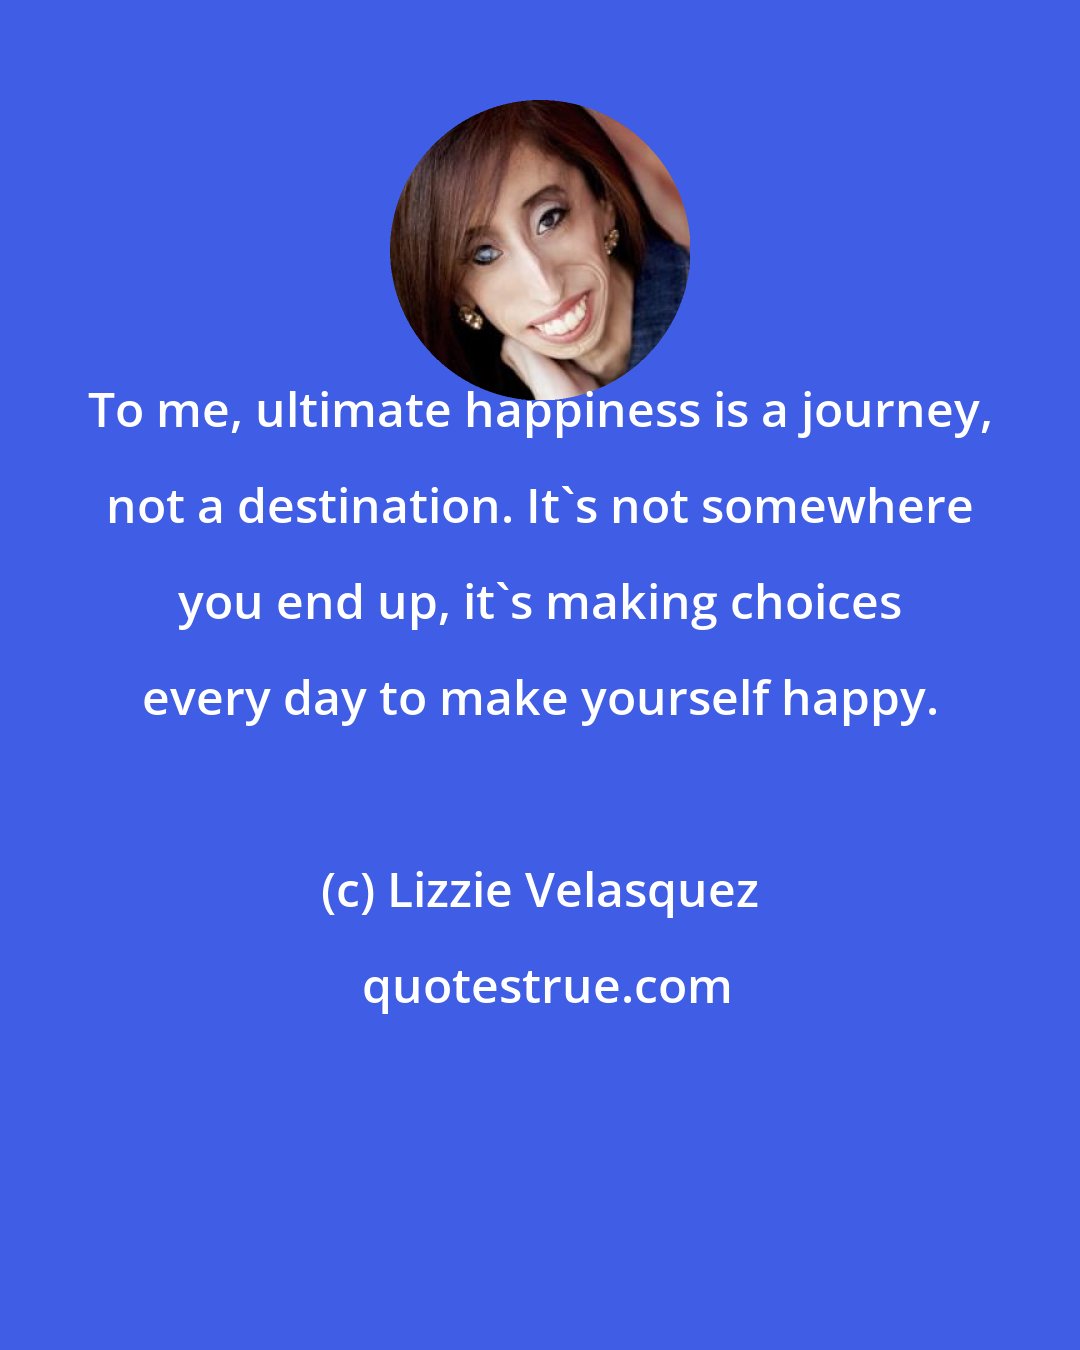 Lizzie Velasquez: To me, ultimate happiness is a journey, not a destination. It's not somewhere you end up, it's making choices every day to make yourself happy.